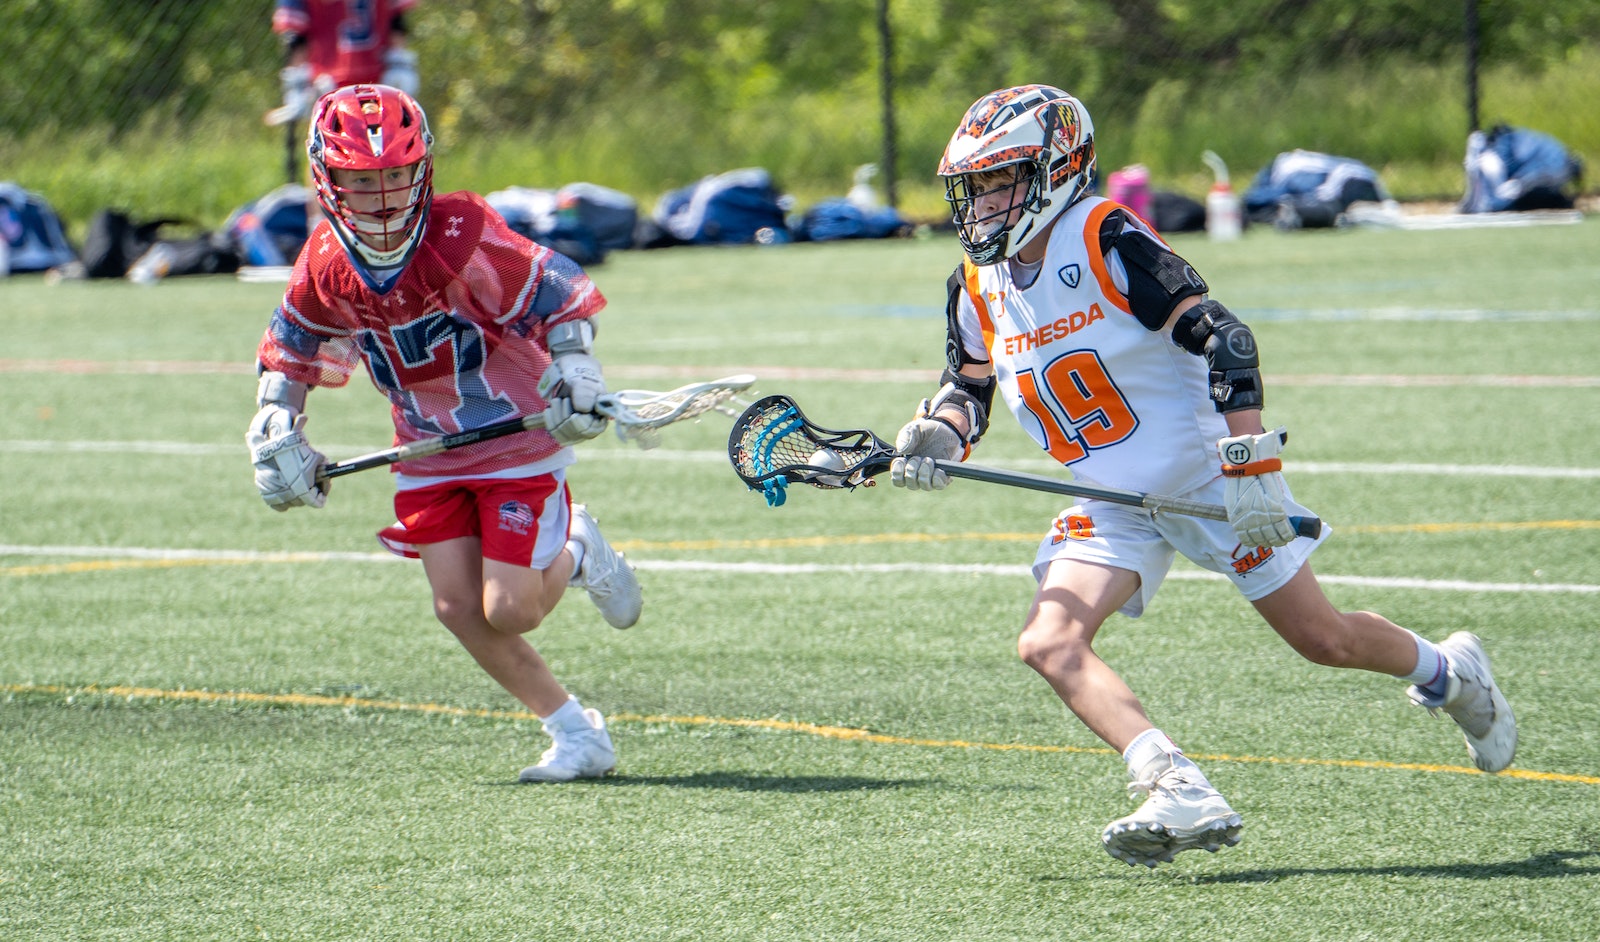 Young Athletes Running on the Field while Holding a Lacrosse Stick